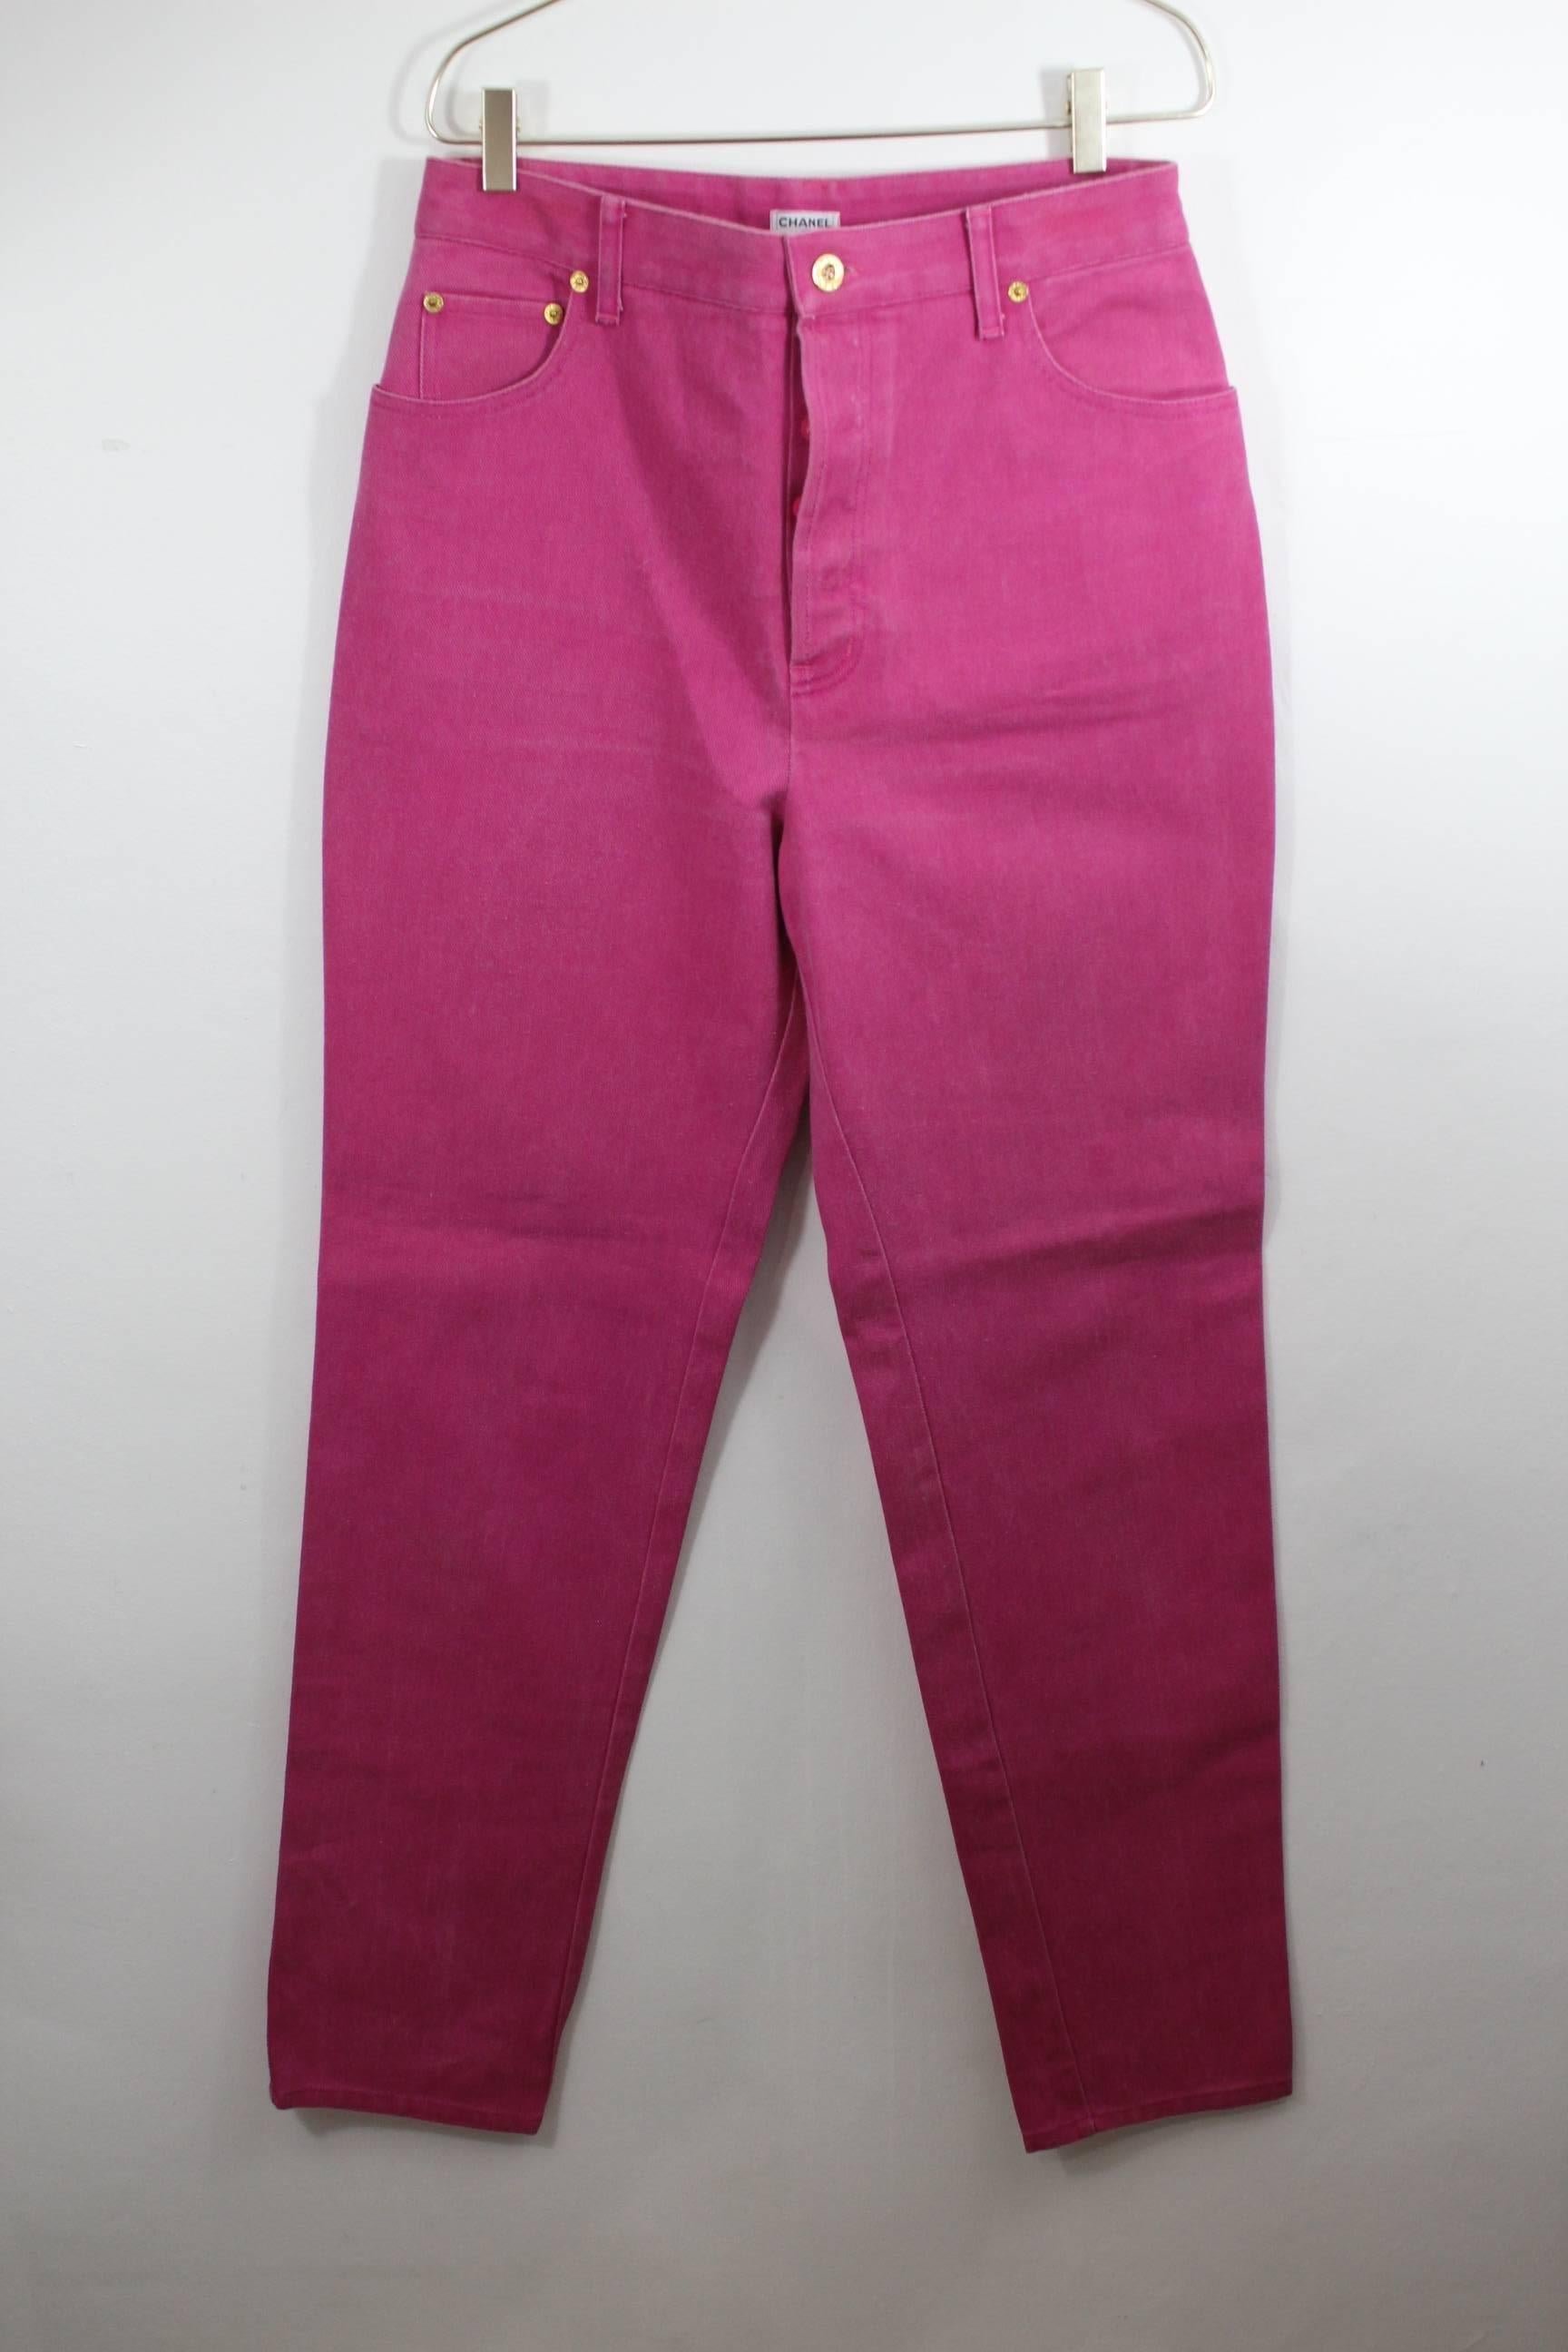 rare suit in jean composed by a pair of jeans and a jacket in pink fuchsia.

Size 40 but as the 90's style they are maxi sizes. 

This have been seen wore by Claudia schiffer in some images of the house

In good condition but the jacket and jeans